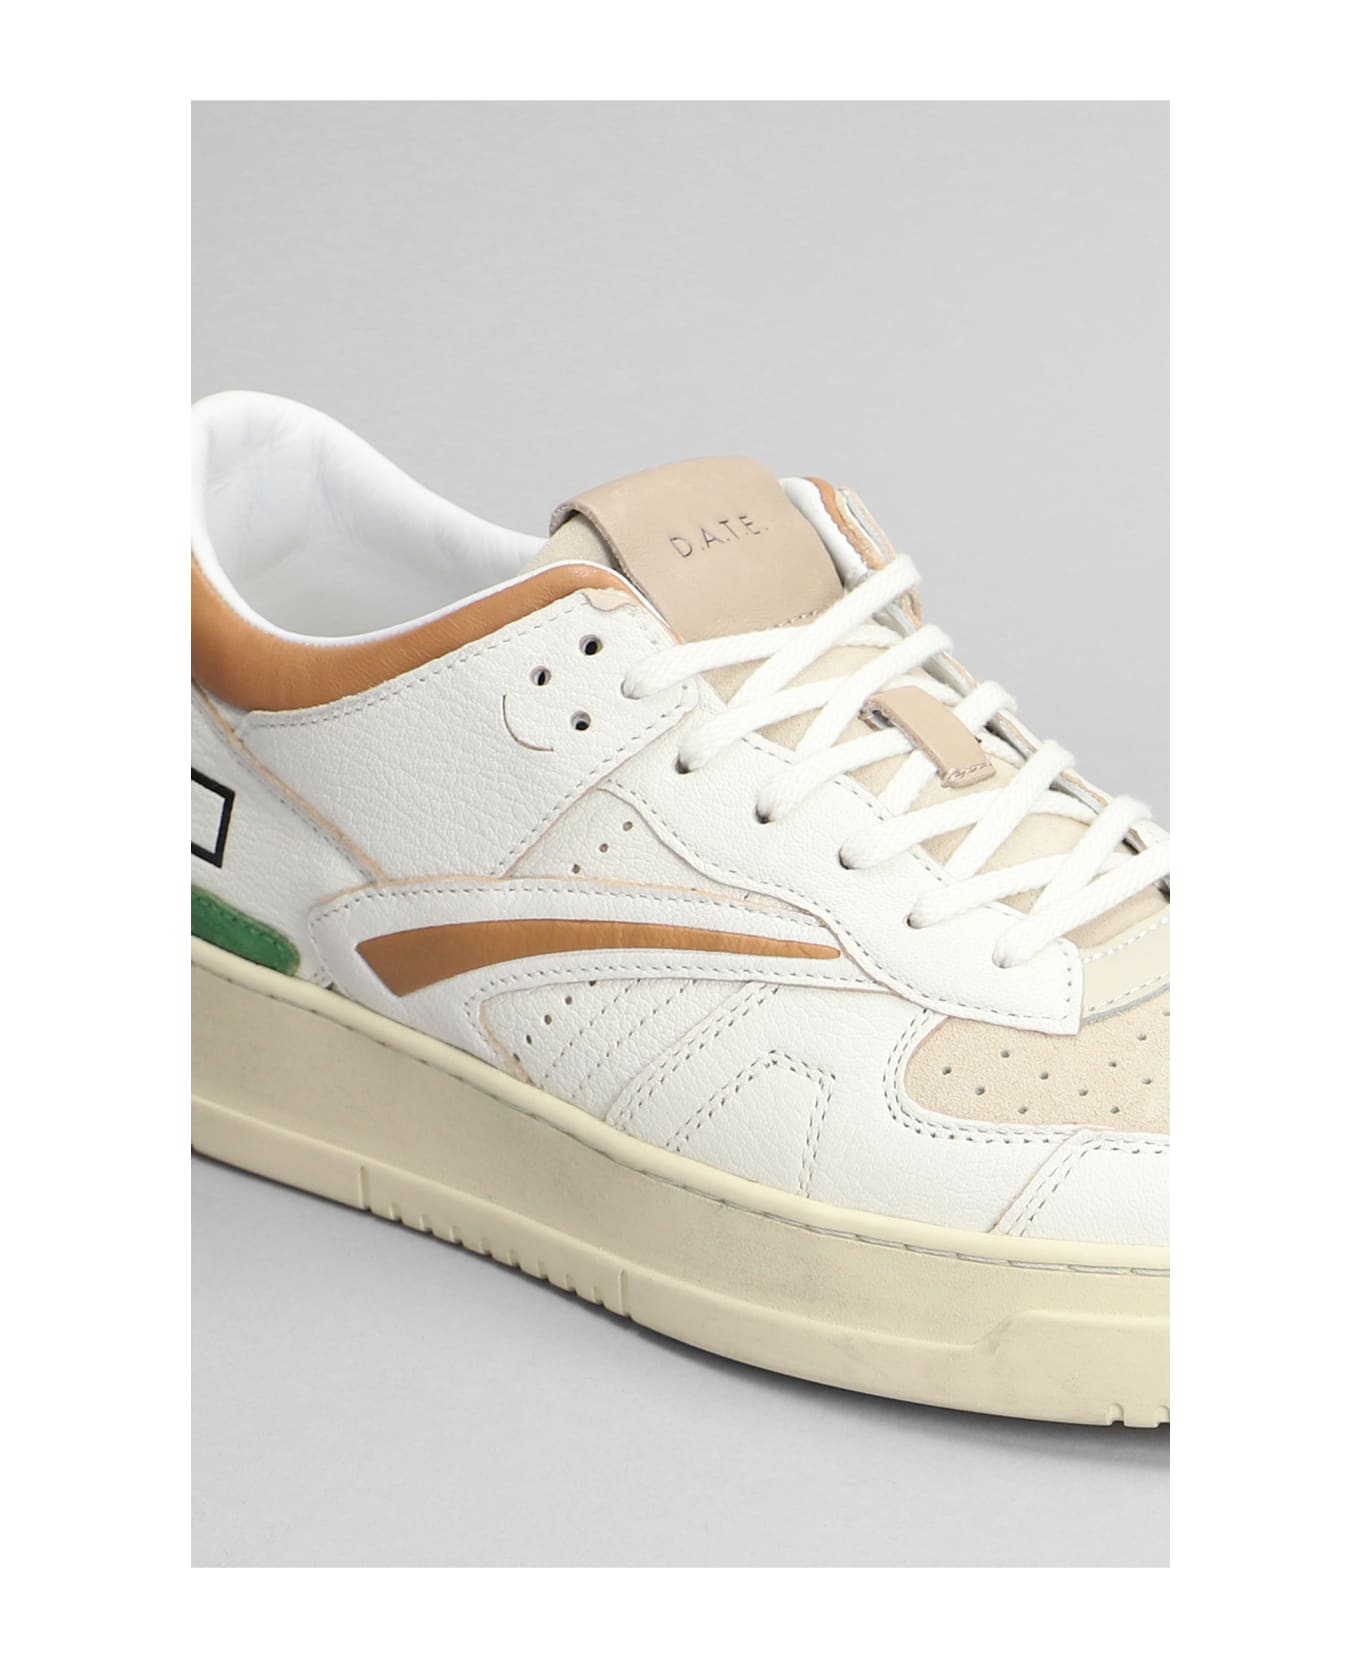 D.A.T.E. Torneo Sneakers In White Leather - white スニーカー